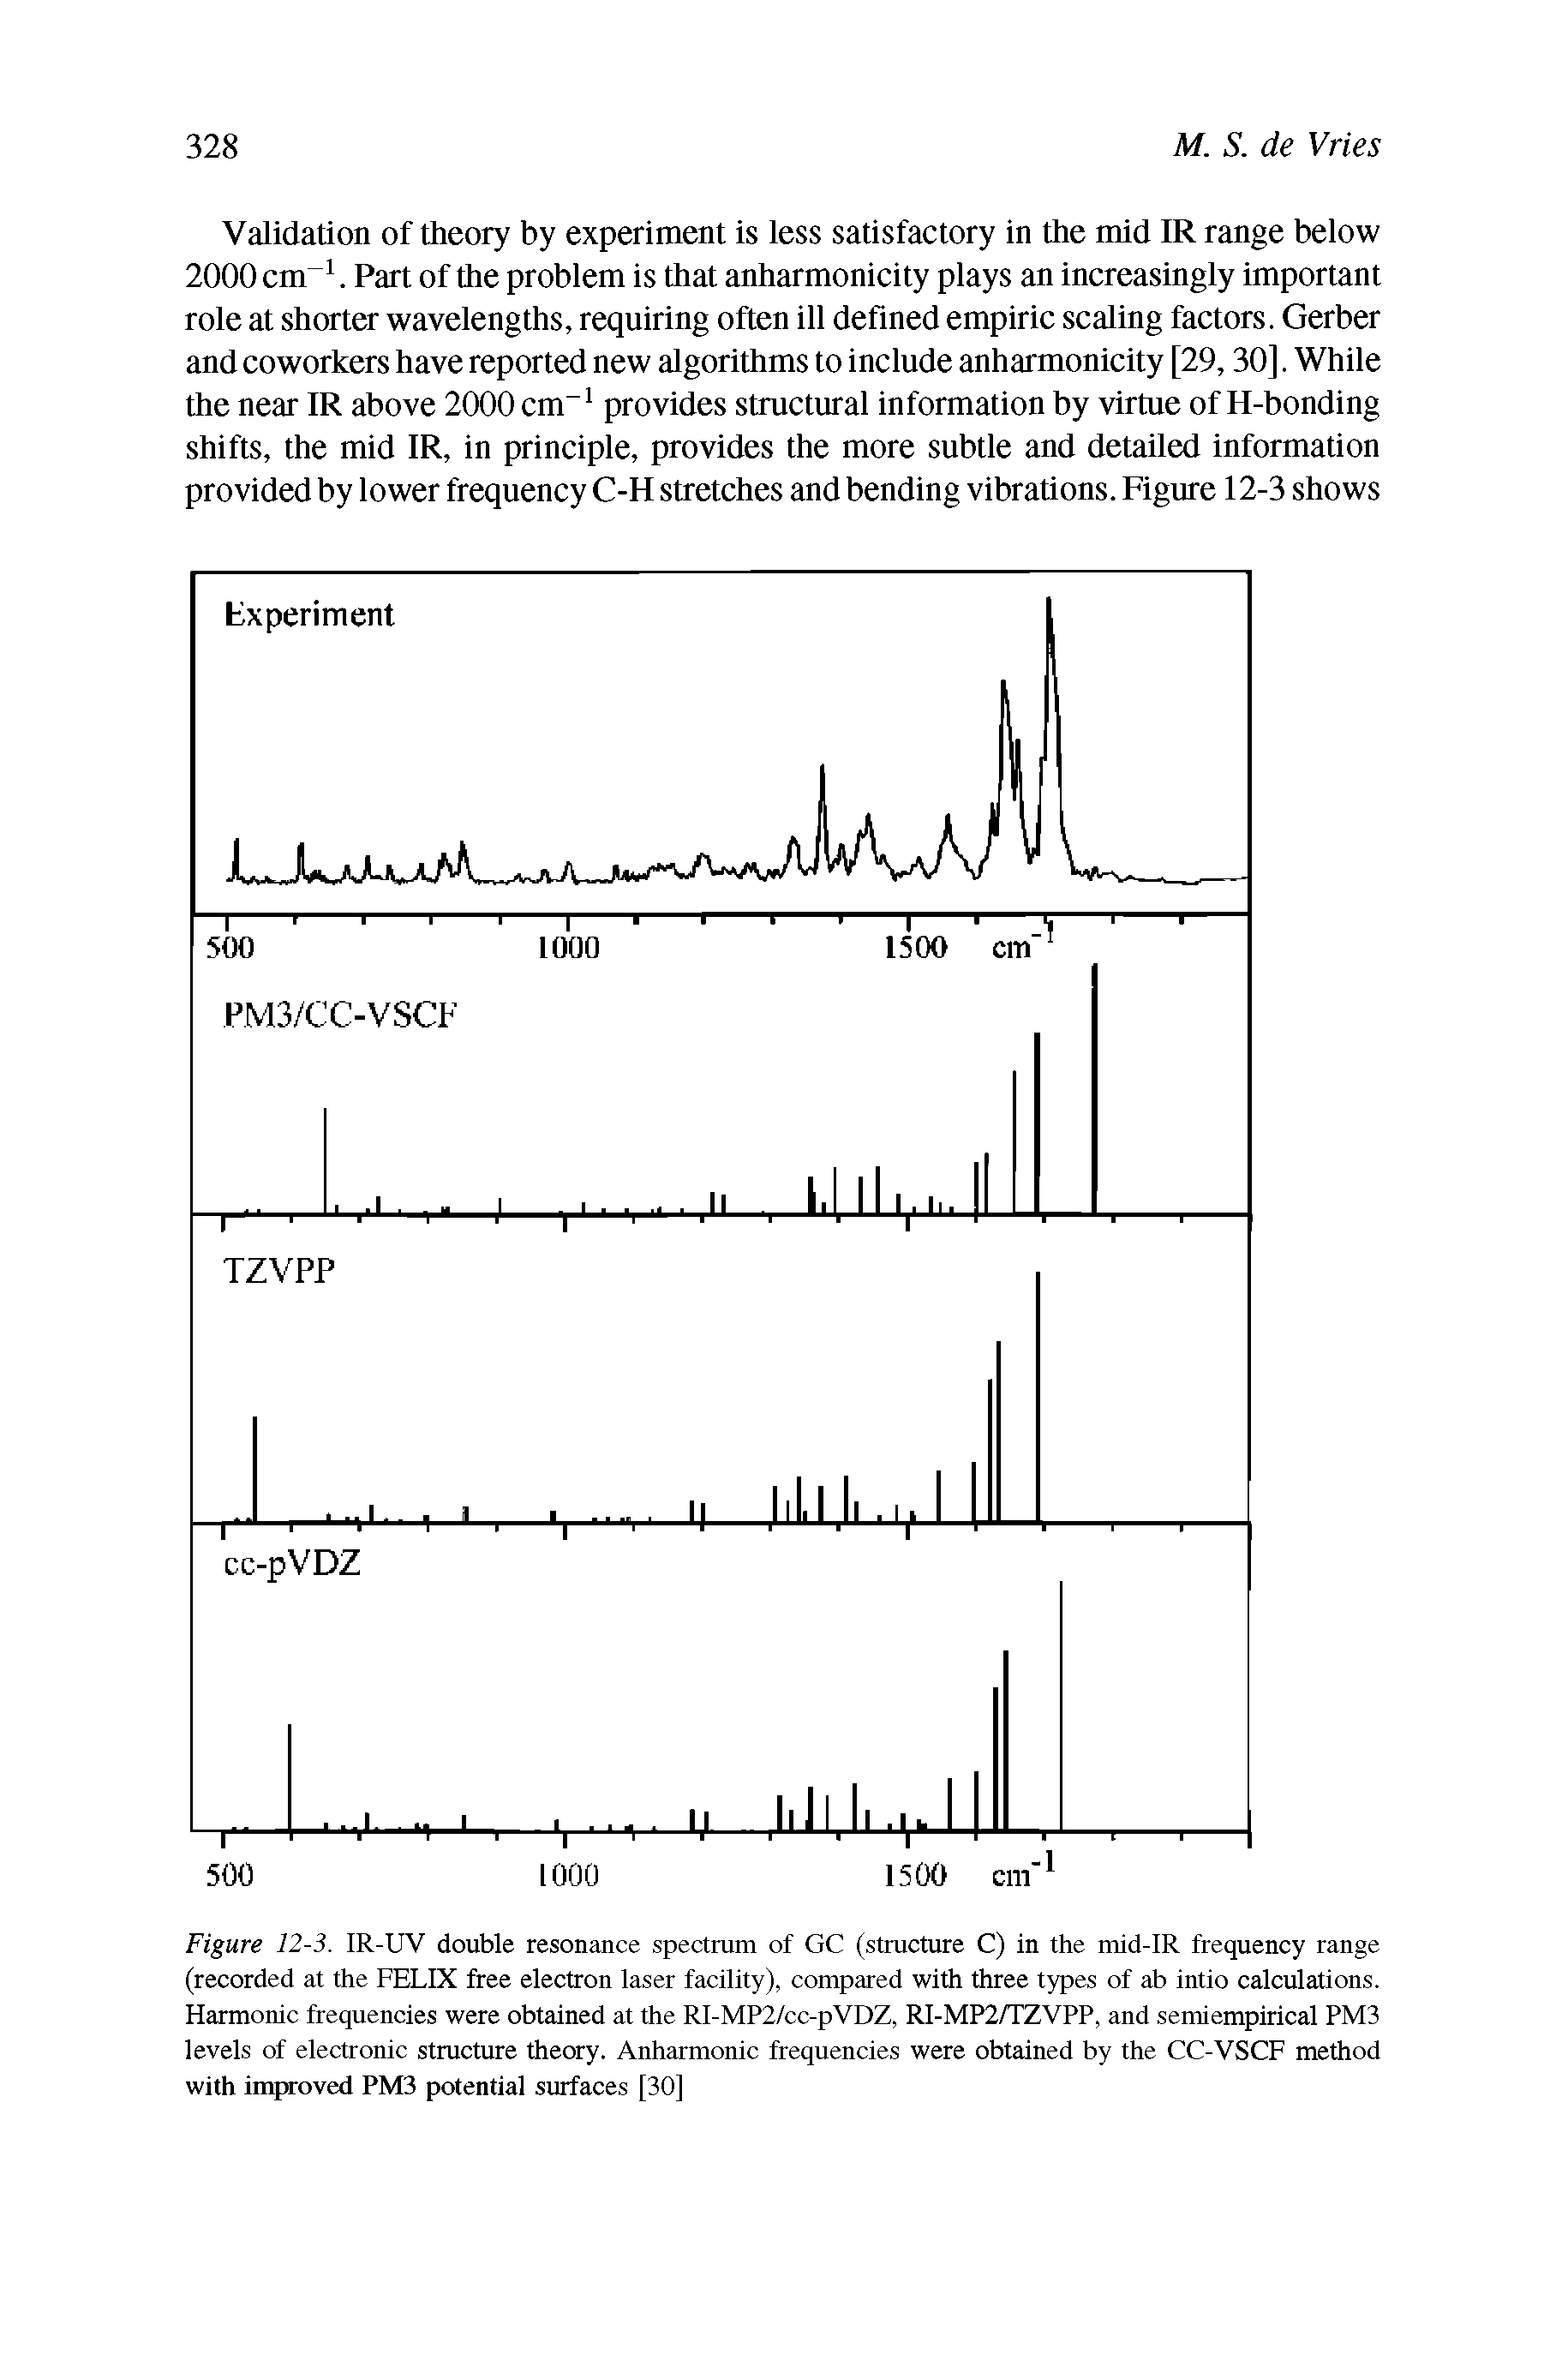 Figure 12-3. IR-UV double resonance spectrum of GC (structure C) in the mid-IR frequency range (recorded at the FELIX free electron laser facility), compared with three types of ab intio calculations. Harmonic frequencies were obtained at the RI-MP2/cc-pVDZ, RI-MP2/TZVPP, and semiempirical PM3 levels of electronic structure theory. Anharmonic frequencies were obtained by the CC-VSCF method with improved PM3 potential surfaces [30]...